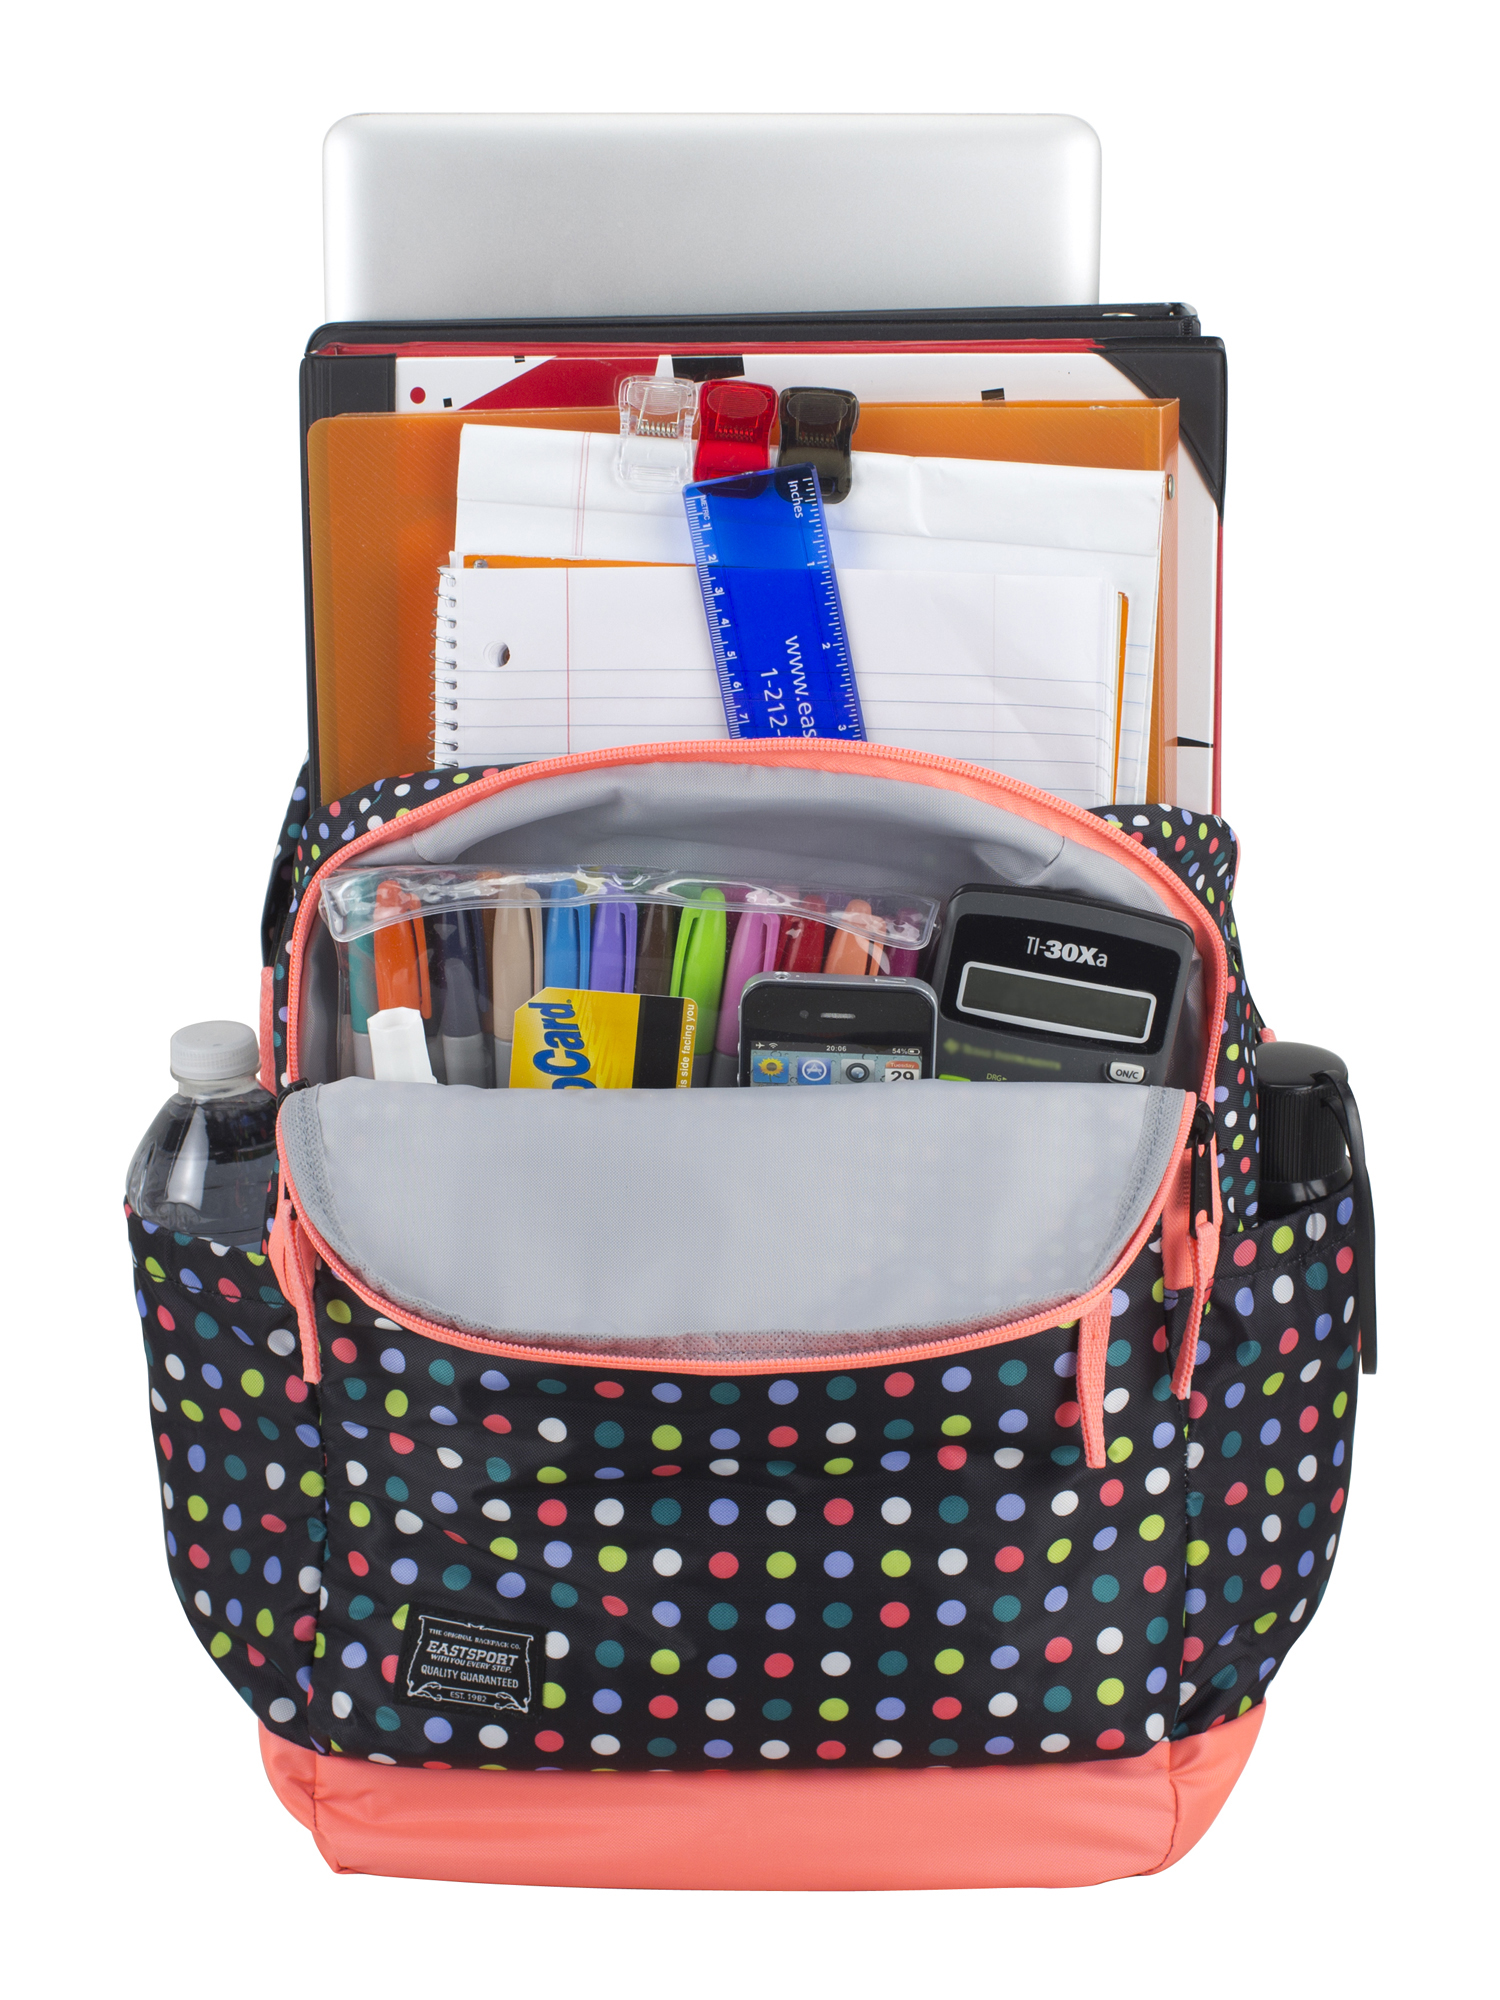 Emma Girl's Student Backpack with Computer Pocket - image 4 of 6